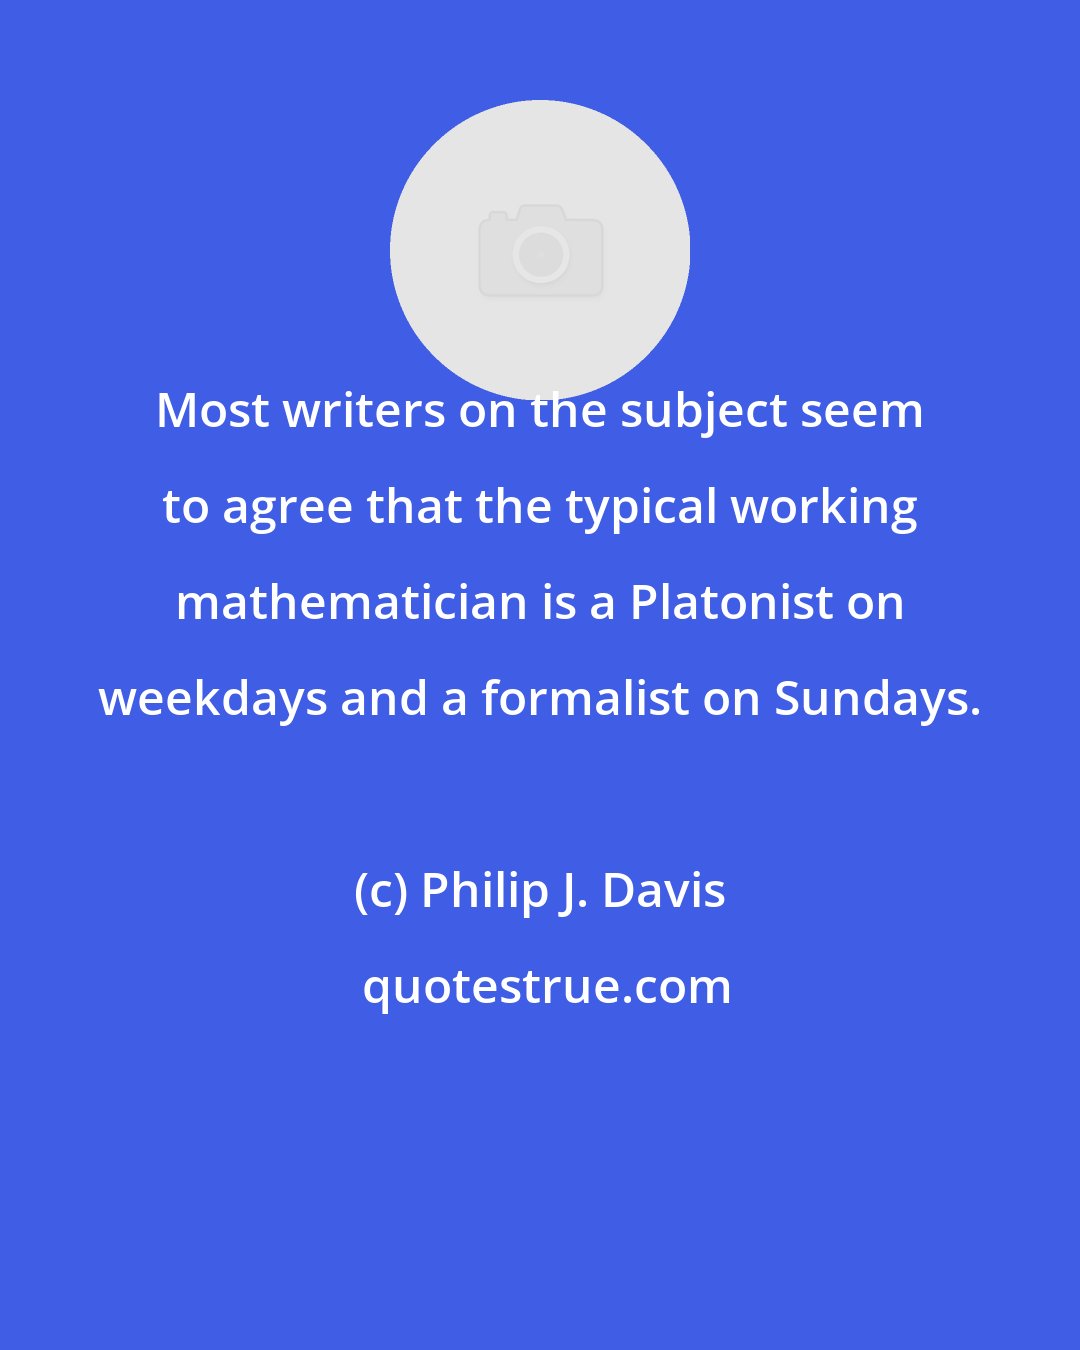 Philip J. Davis: Most writers on the subject seem to agree that the typical working mathematician is a Platonist on weekdays and a formalist on Sundays.